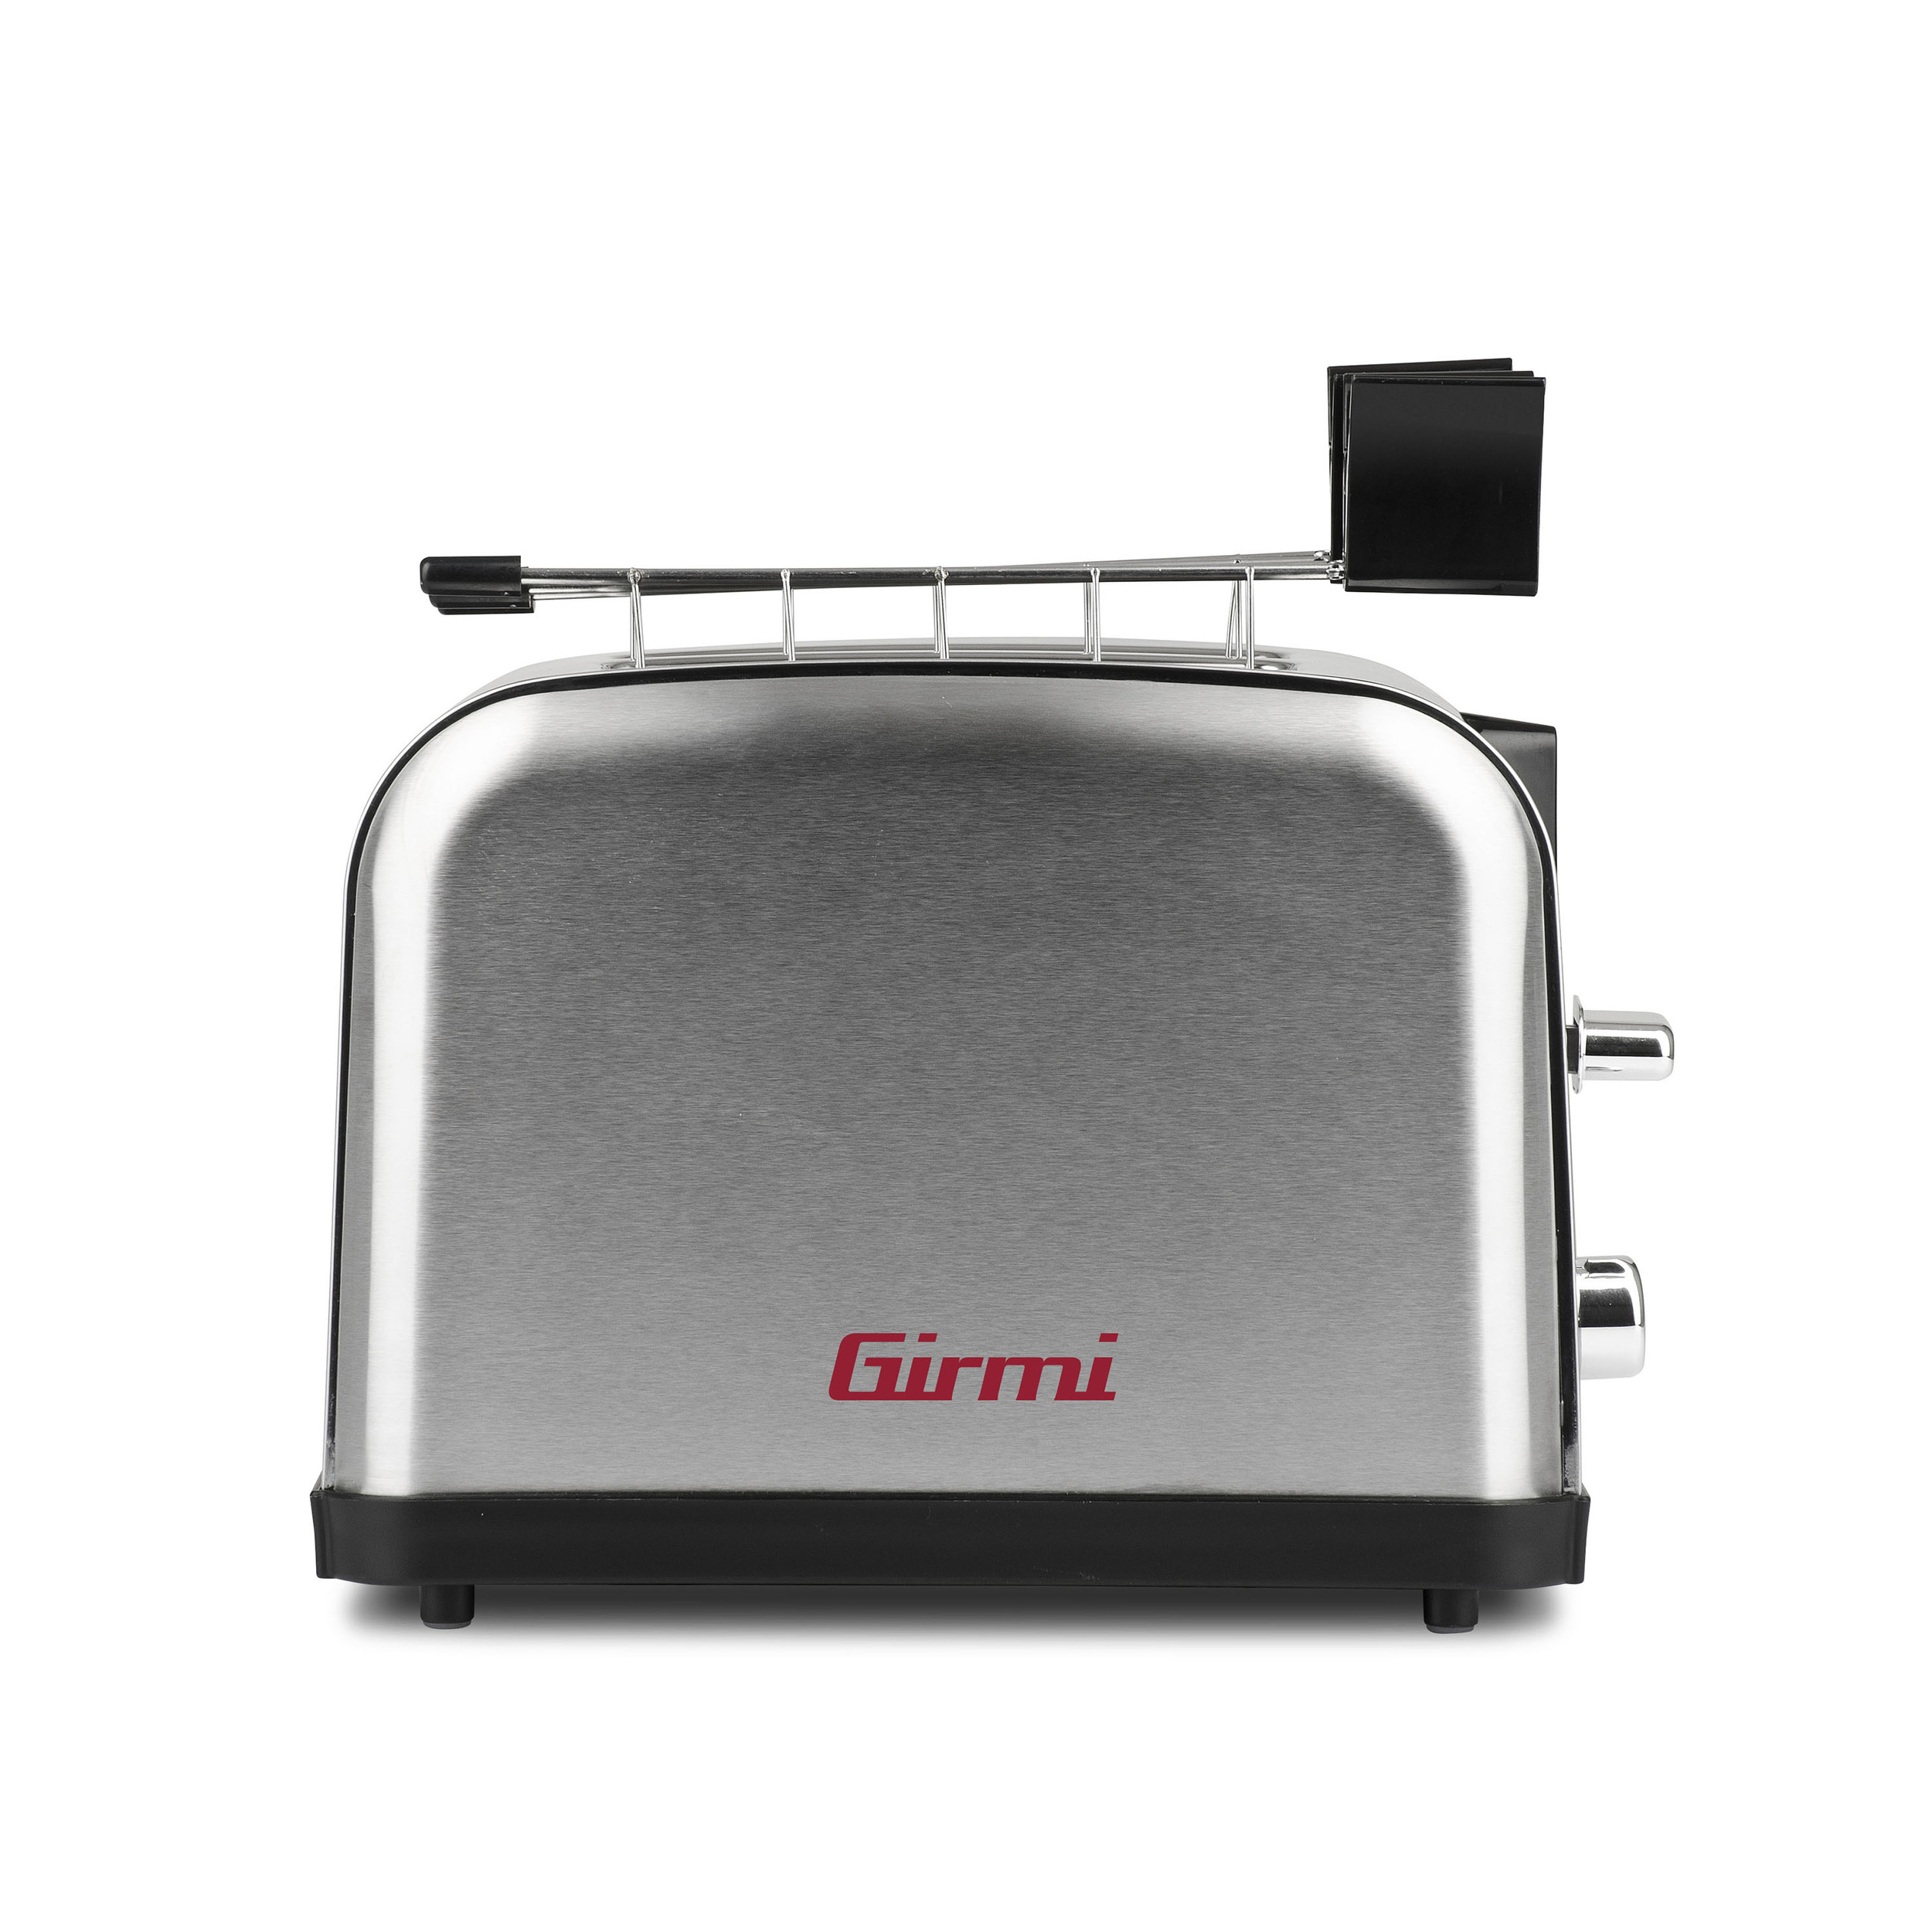 Toaster TP5606